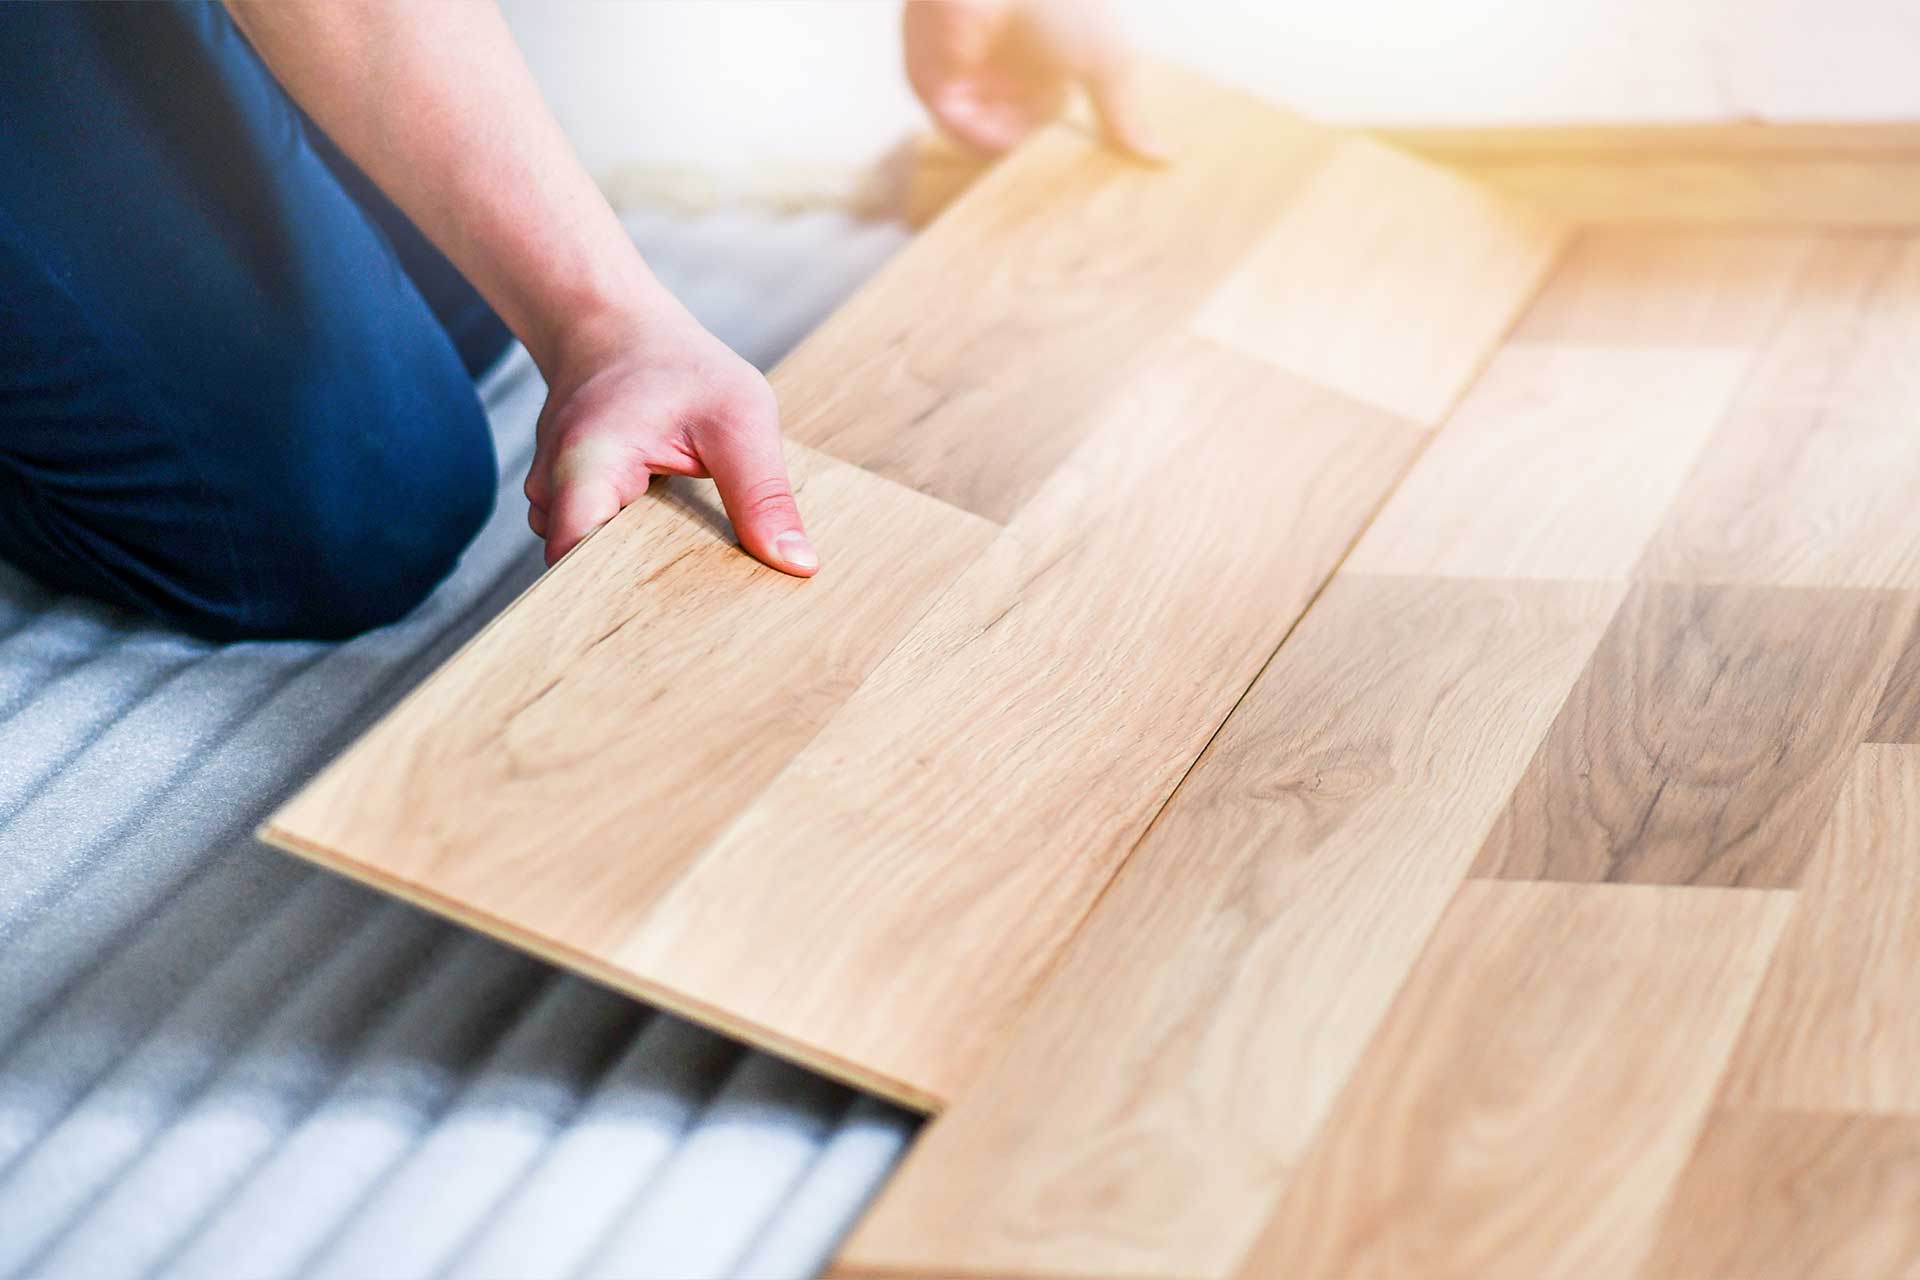 Laminate Flooring Fitting Cost In 2021, How Much Does It Cost To Install Laminate Flooring Uk